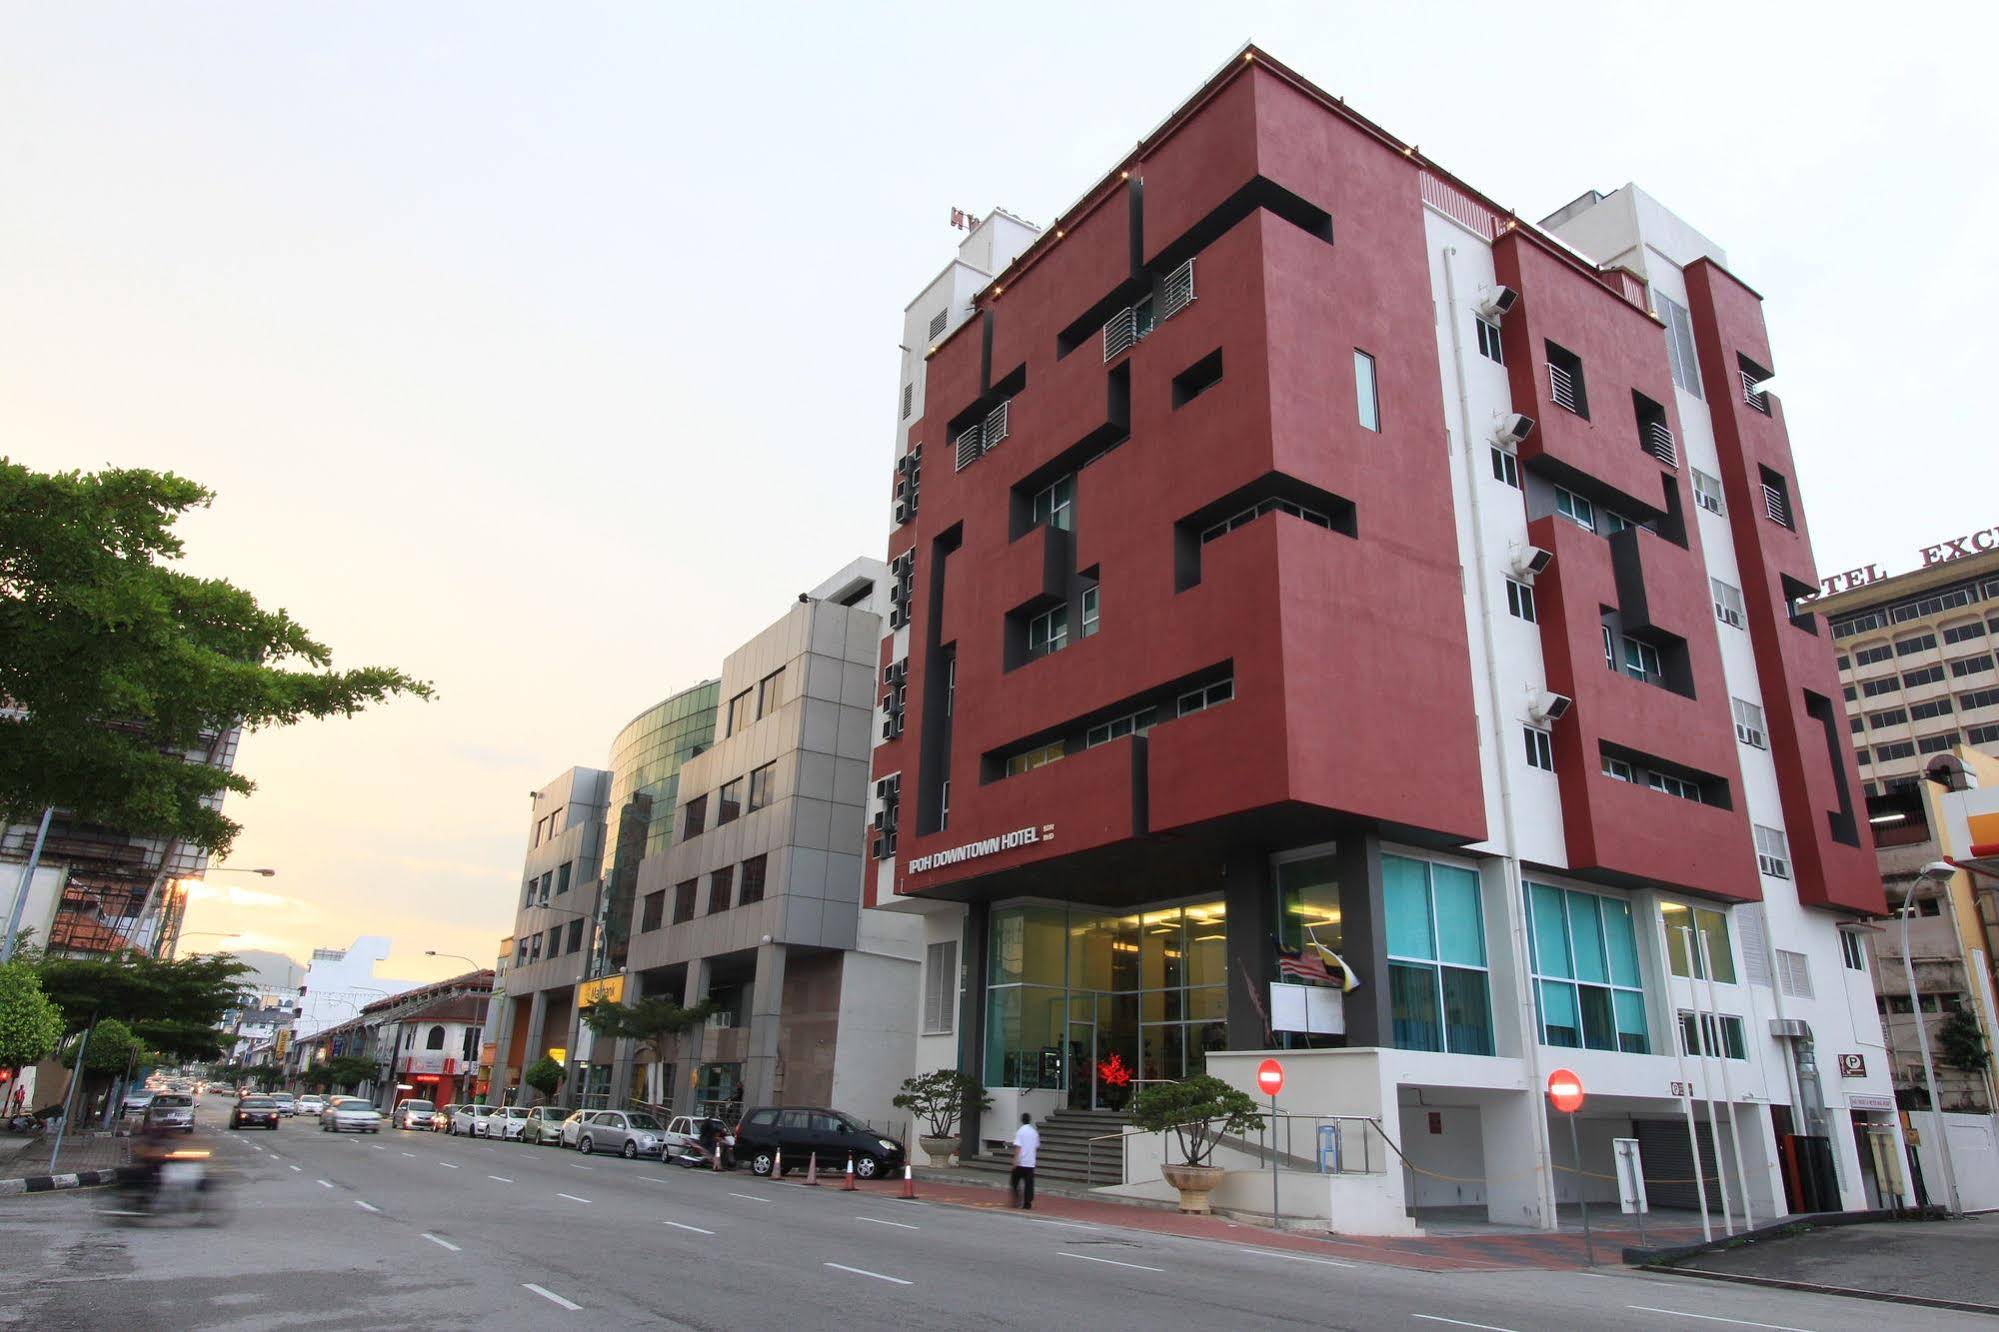 Ipoh Downtown Hotel